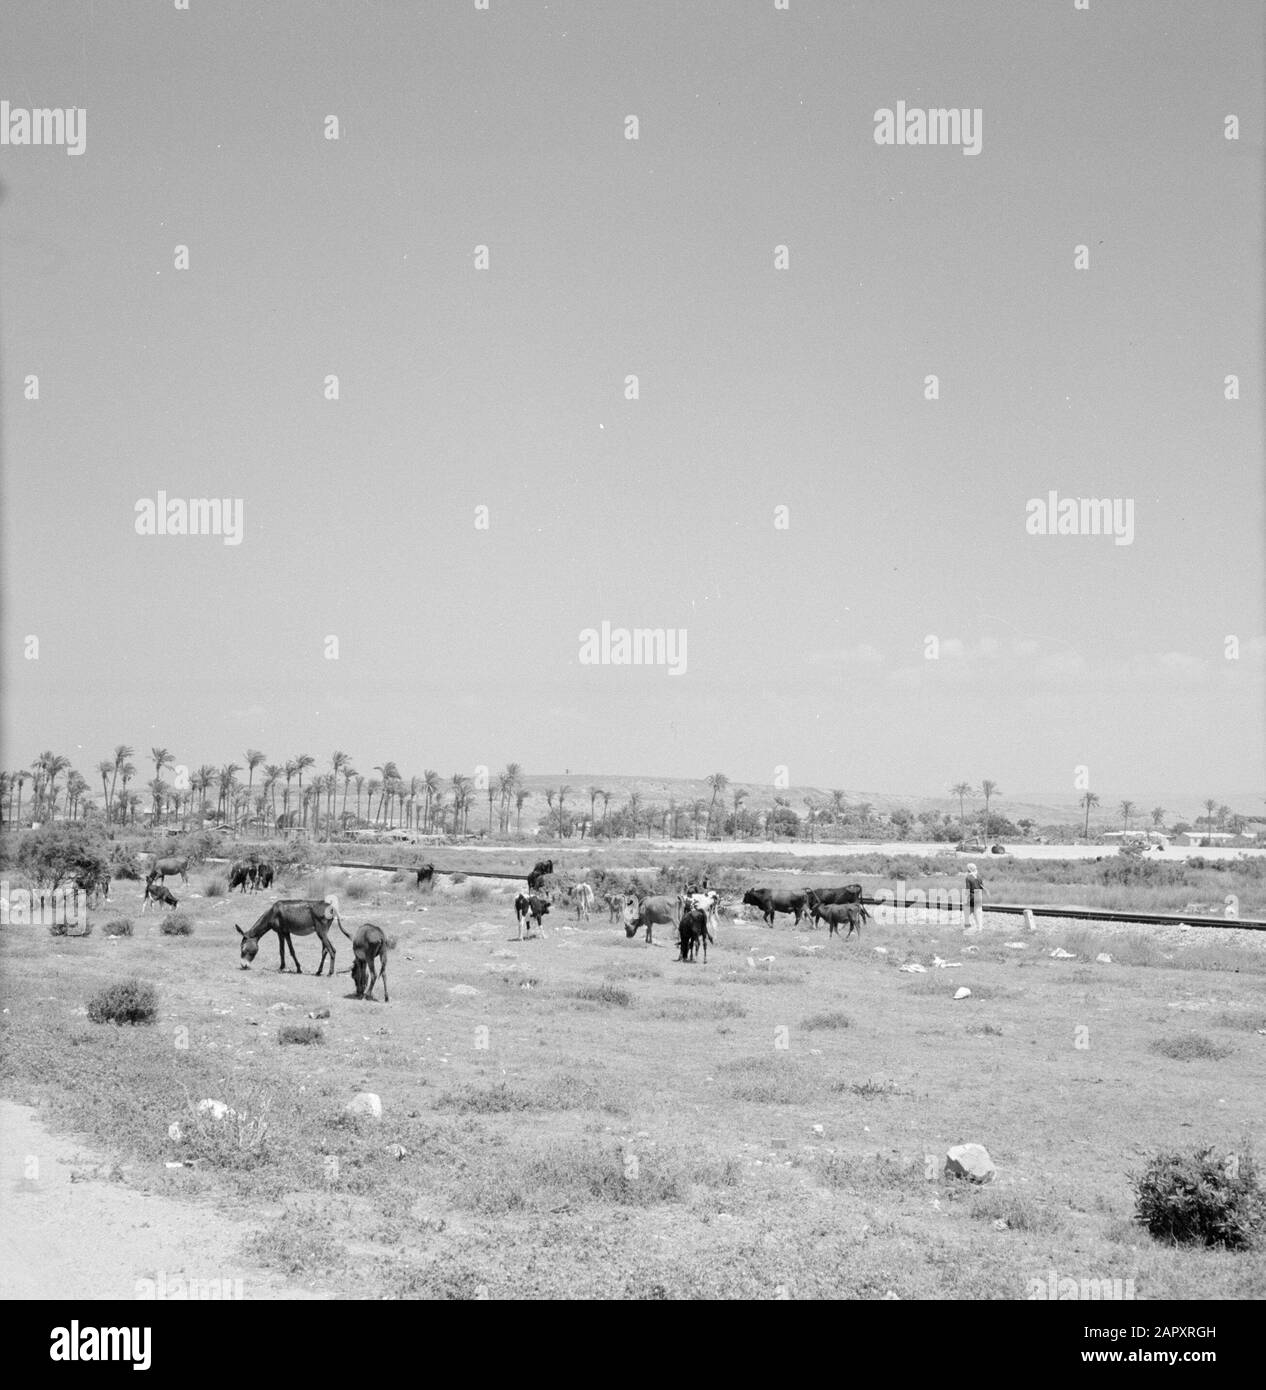 Israel 1964-1965: Akko (Acre), cityscape  View over grazing cattle and palm trees in a rolling landscape (so-called Napoleon hill; Napoleon tried to conquer Akko) Annotation: Akko (also known as Napoleon) Acre) is an ancient port town in northern Israel, located on the Mediterranean Sea. The city is located 23 kilometres north of Haifa. Akko has a characteristic medieval and oriental appearance, with many old buildings and walls. In the Hellenistic and Roman times the city bore the name Ptolemaize Date: 1964 Location: Acre, Israel Keywords: herds, cityscapes, livestock Stock Photo